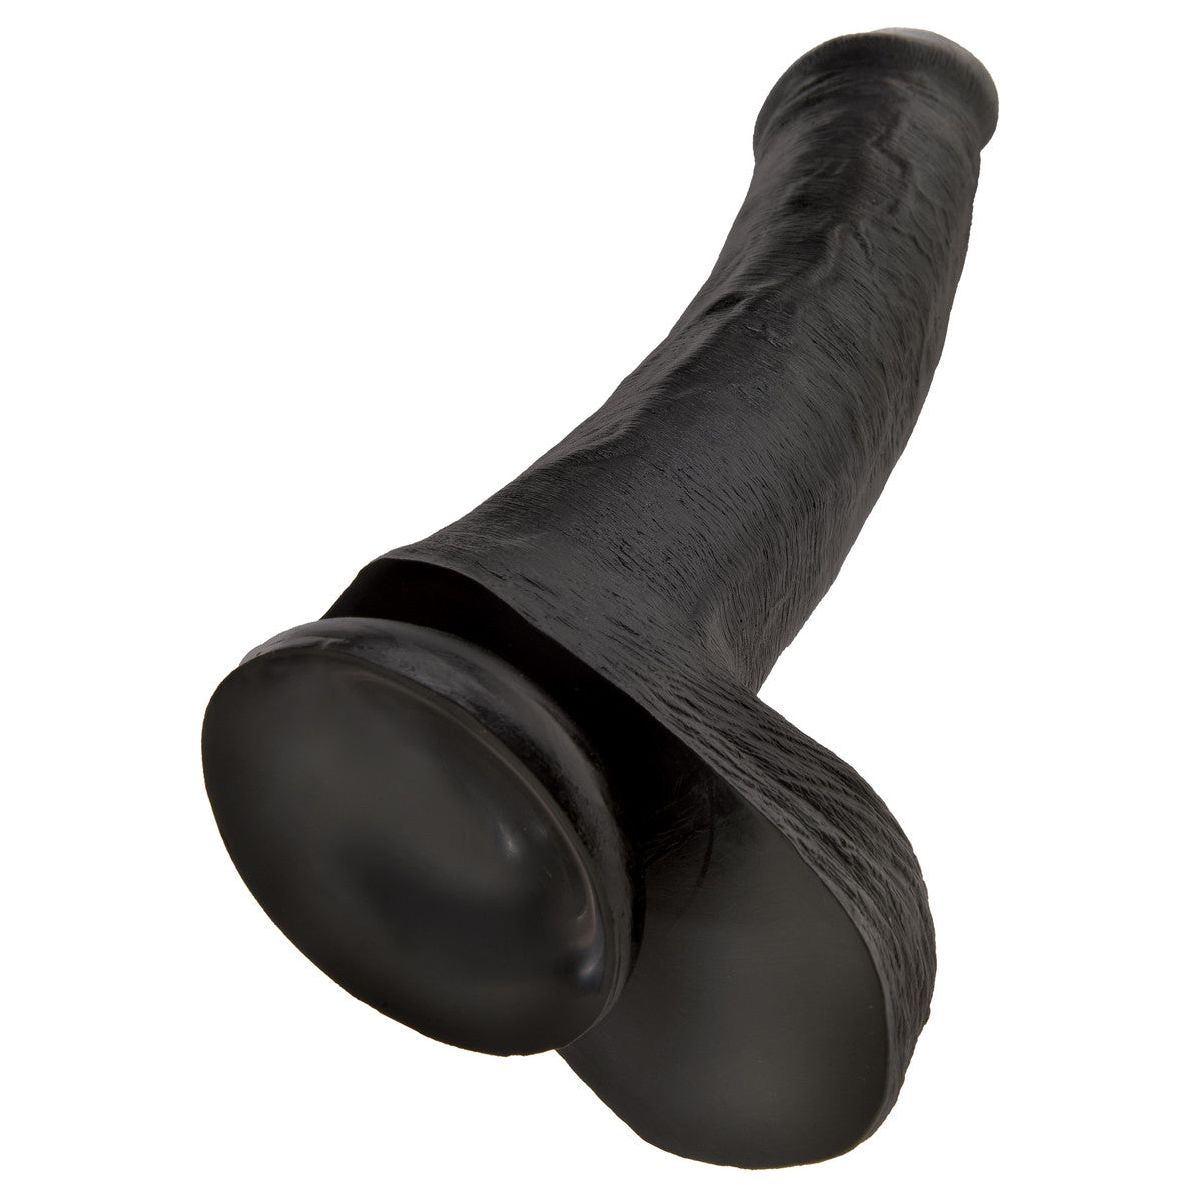 King Cock 13 in. Cock with Balls Black